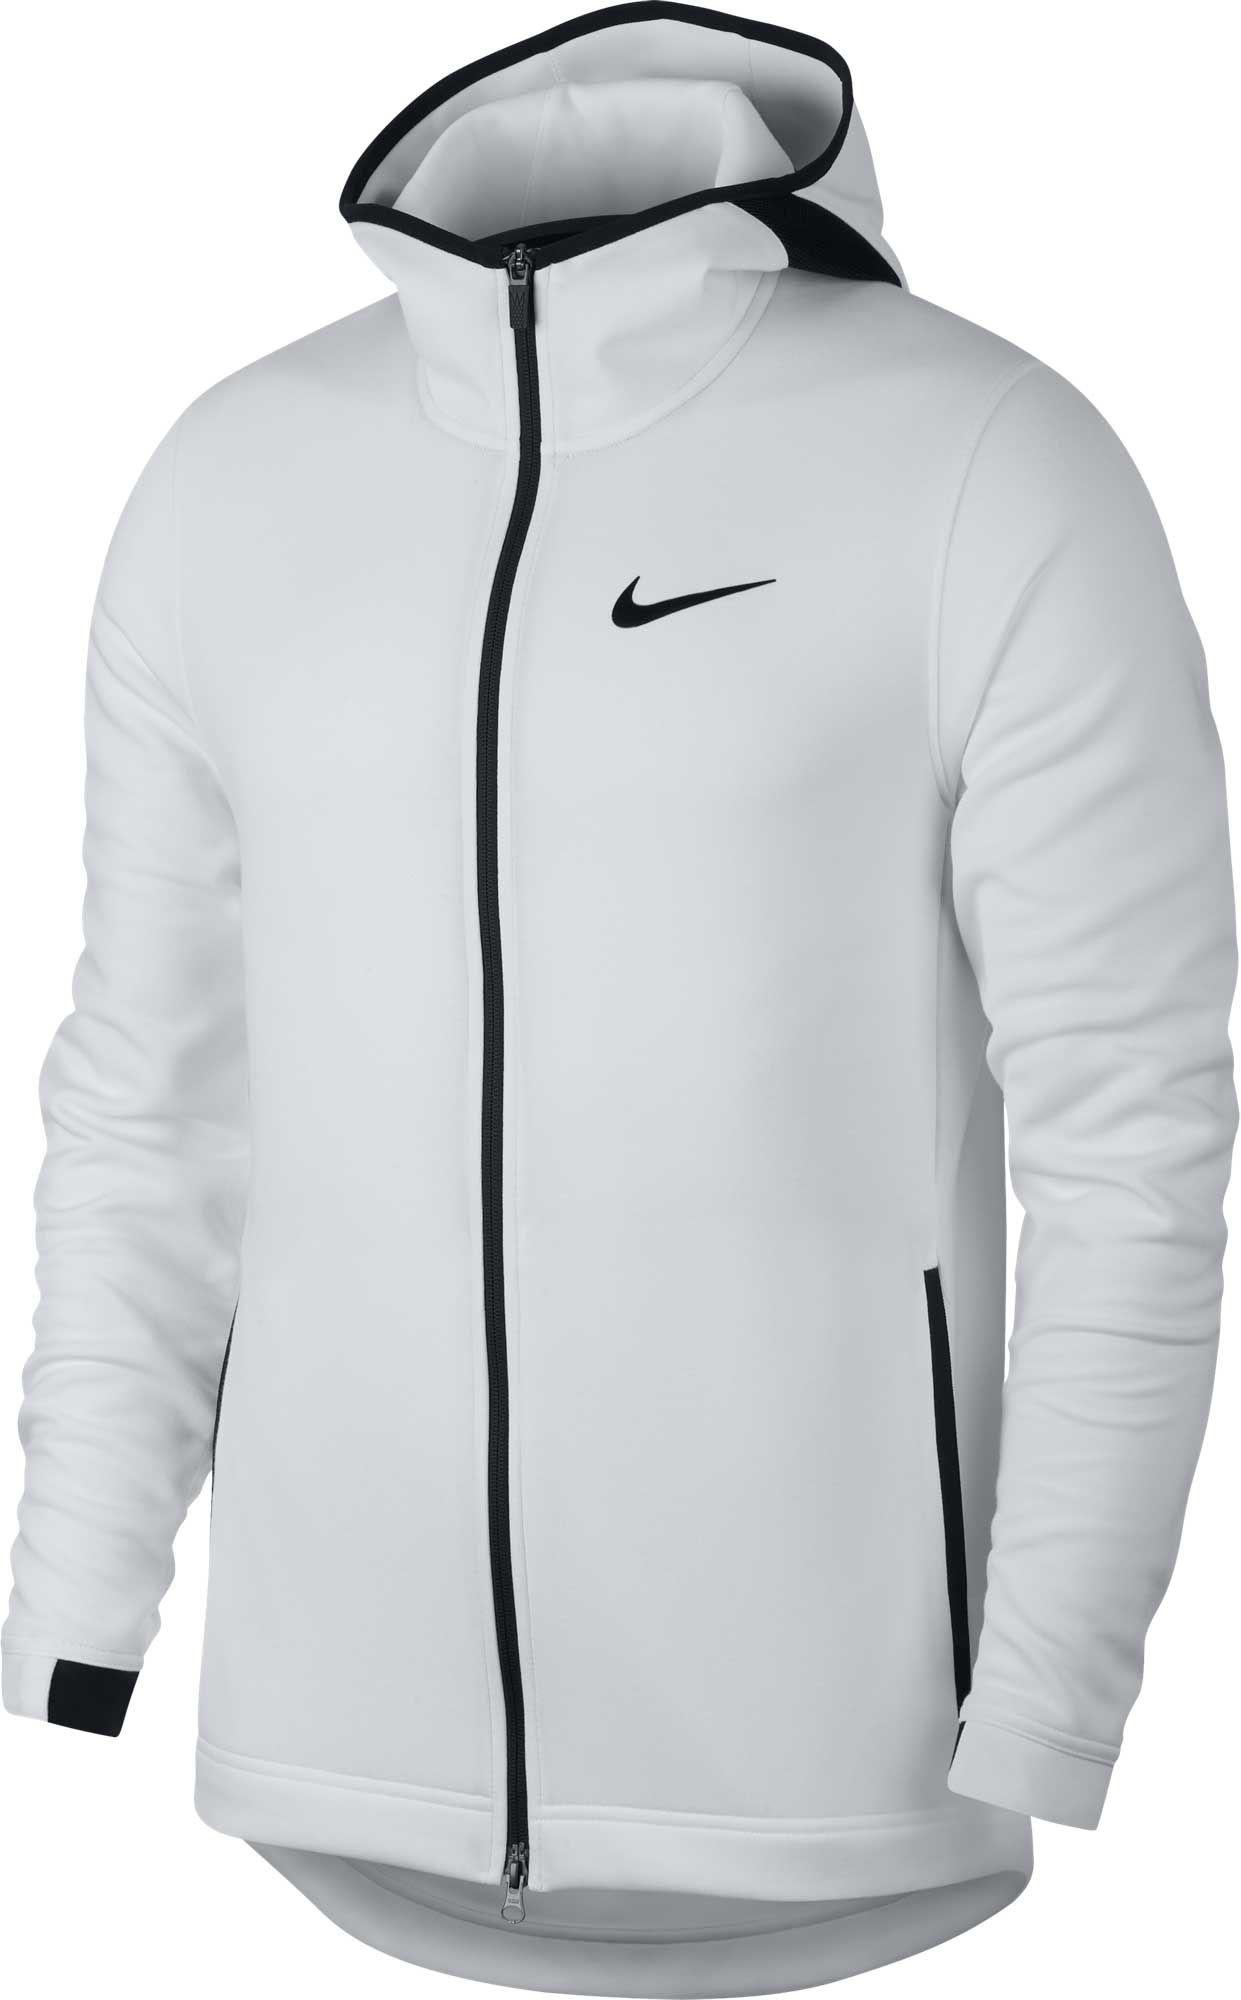 Nike Synthetic Therma Winterized Full-zip Hoodie in White/Black (White ...